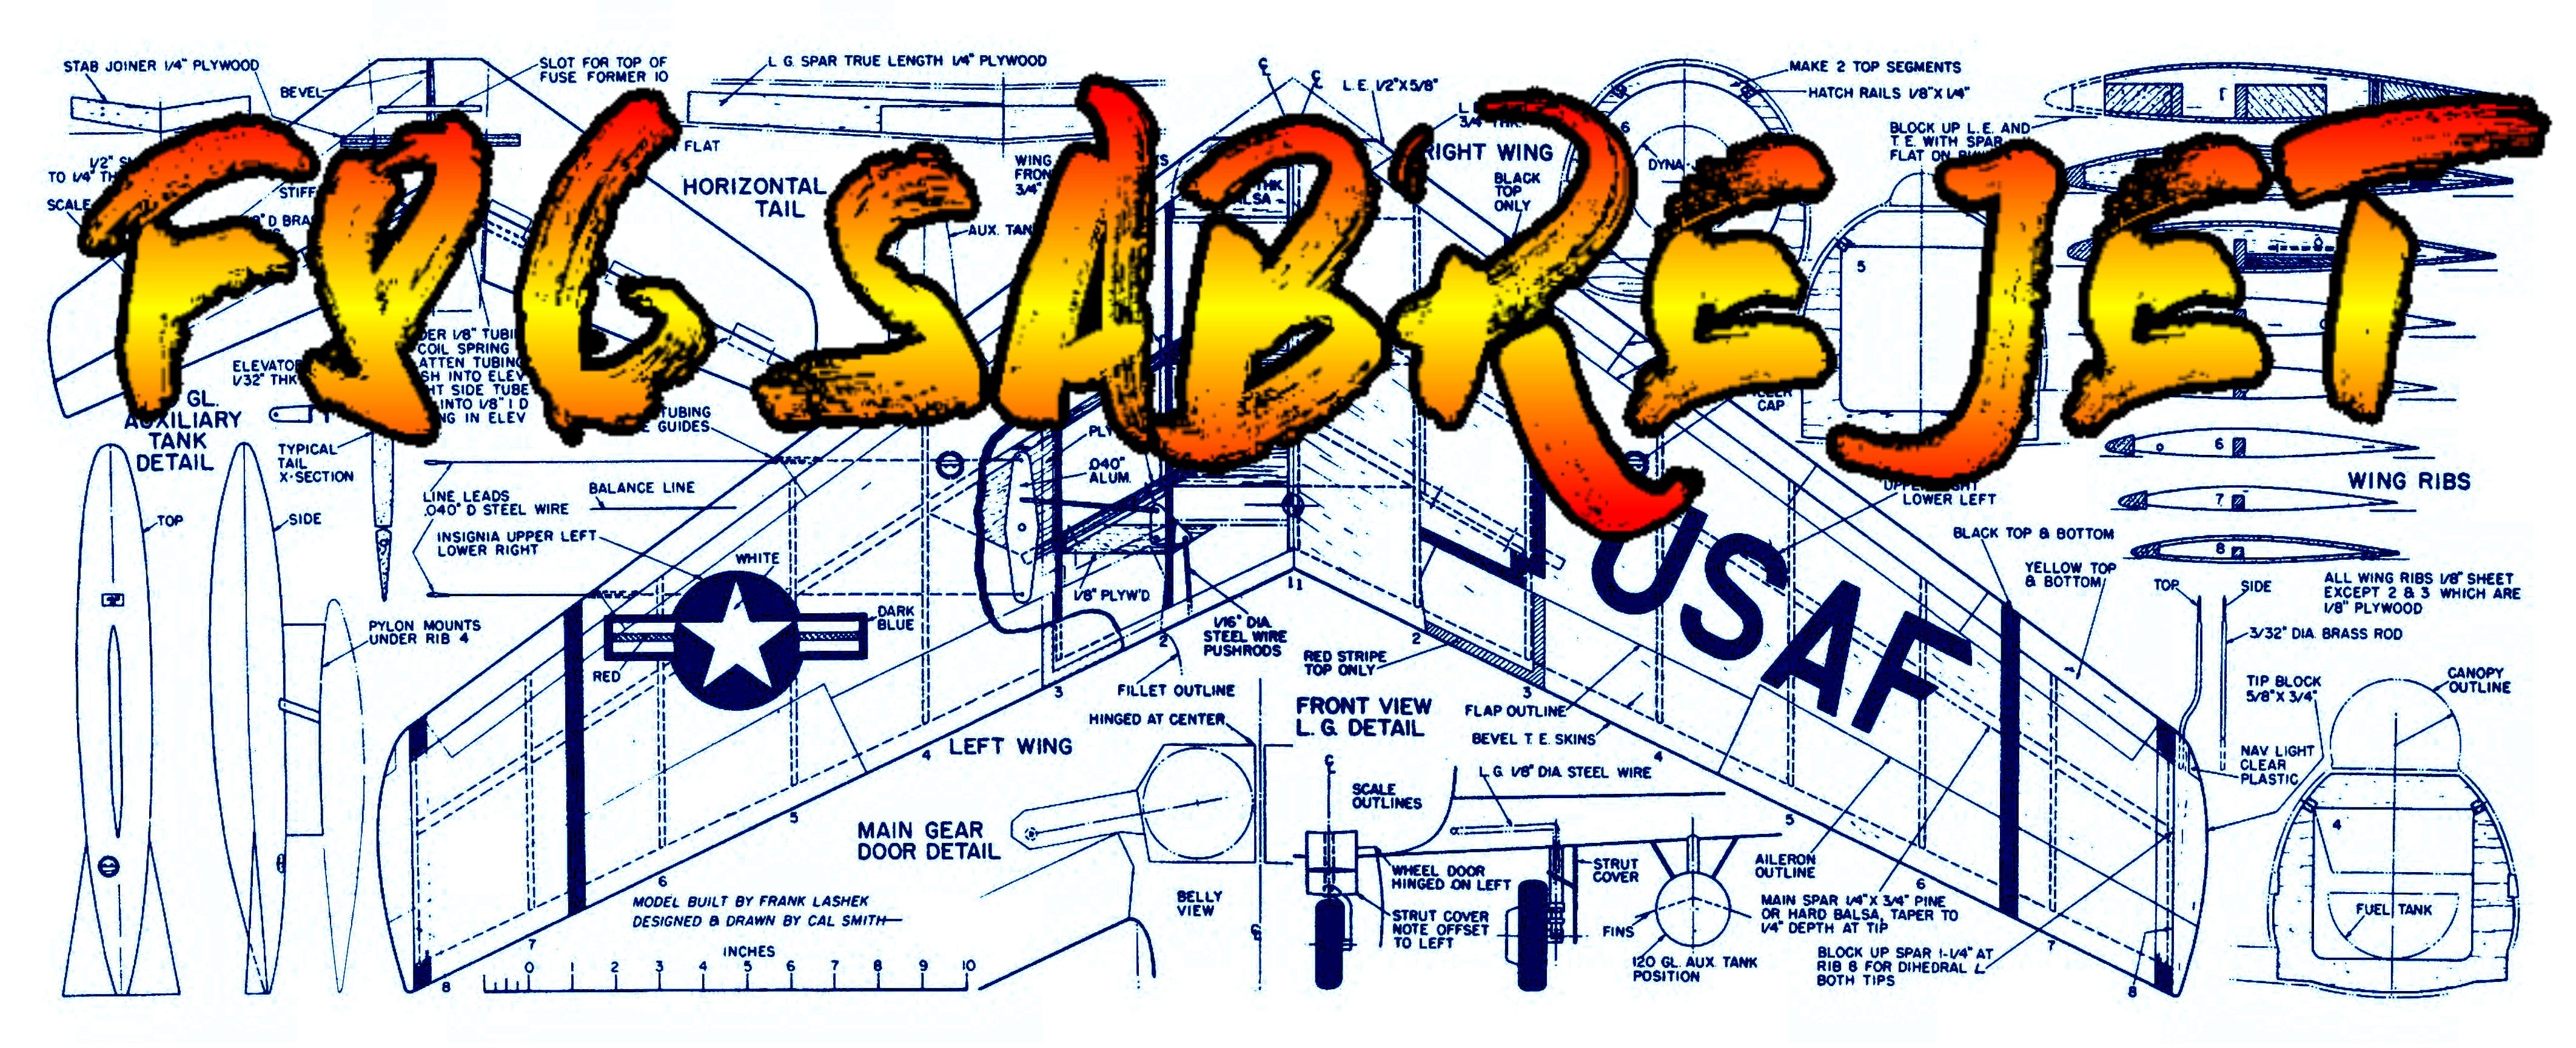 full size plans f86 sabre jet control line  scale 1 1/8” =1ft  wingspan 41”  dyna-jet or ducted fan